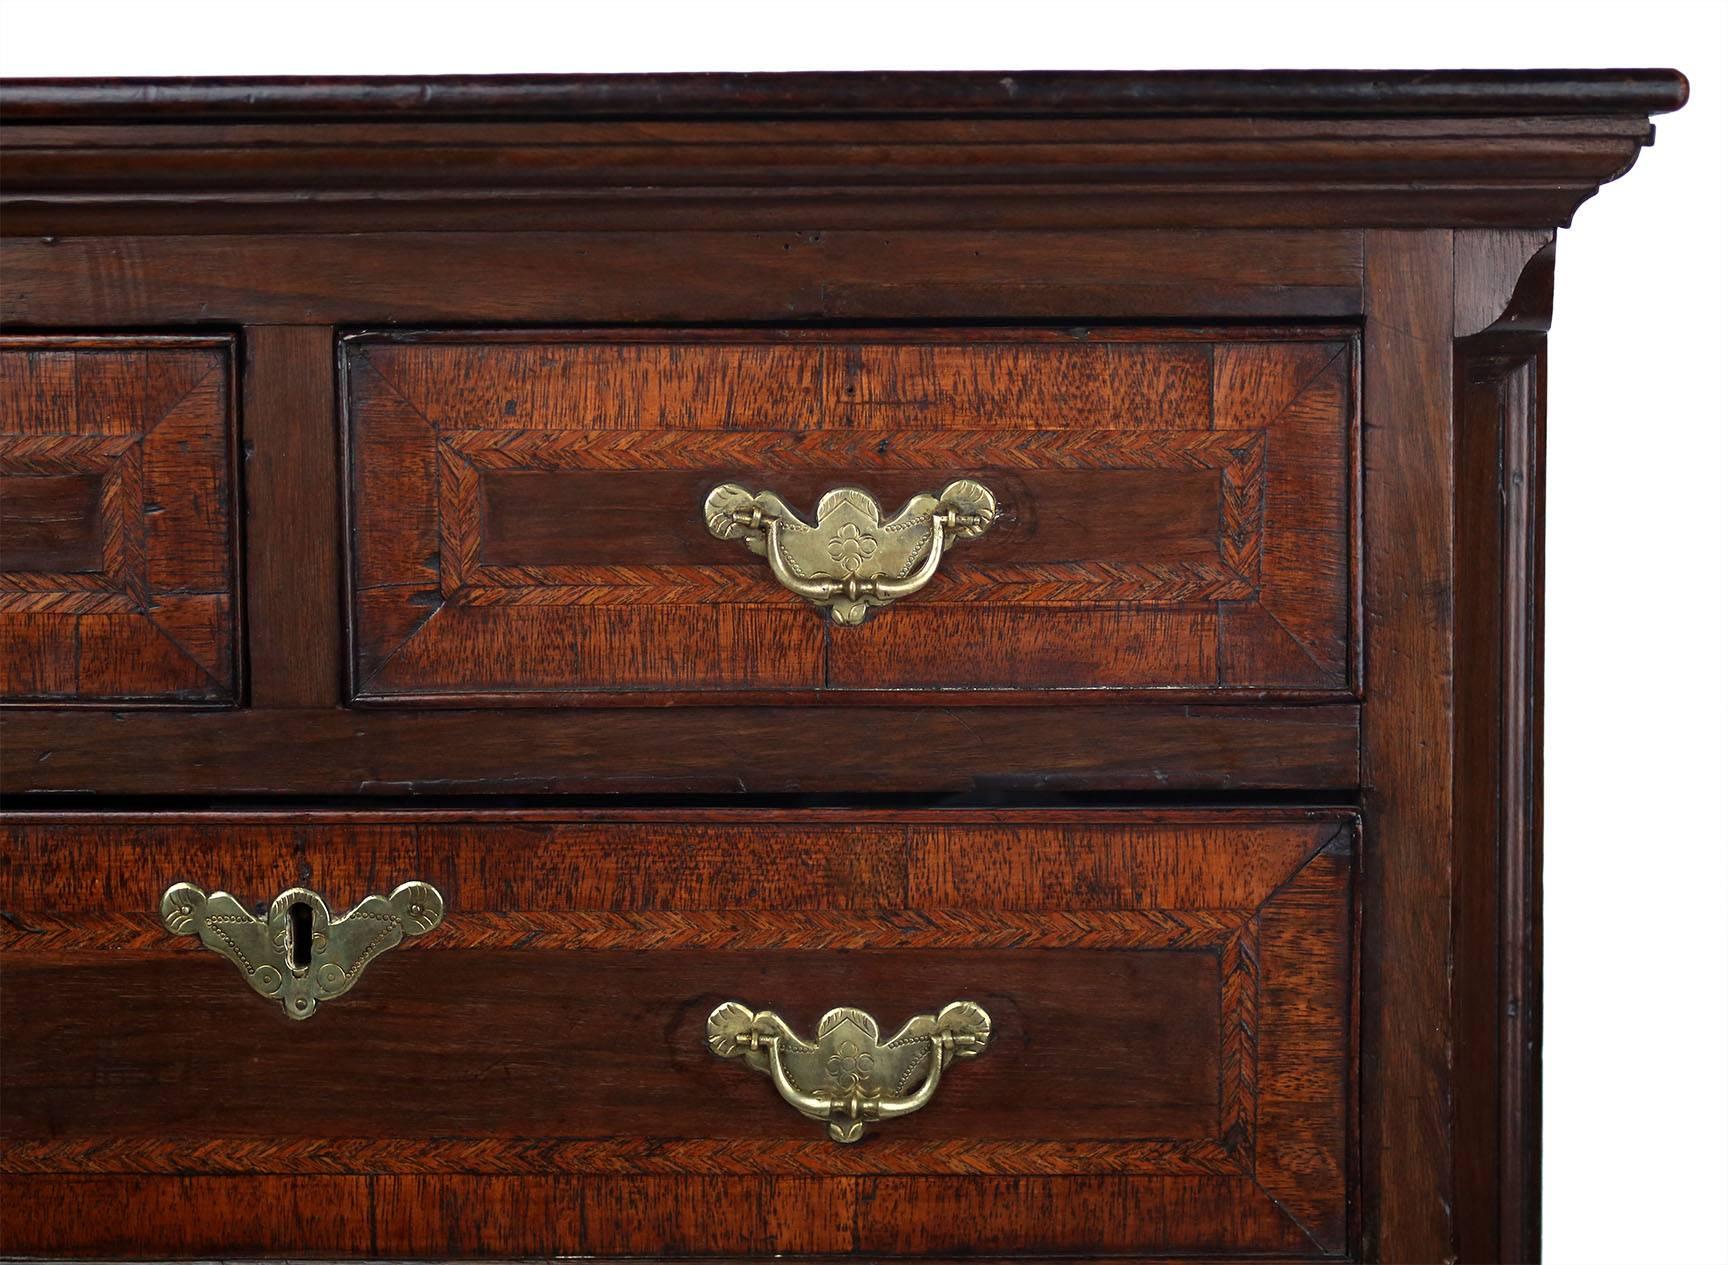 A rare highboy of diminutive proportions in walnut and mahogany with fine marquetry, feather banding, and cockbeading. The molded cornice is set on the upper case with canted and molded corners, containing five drawers. The lower case has three